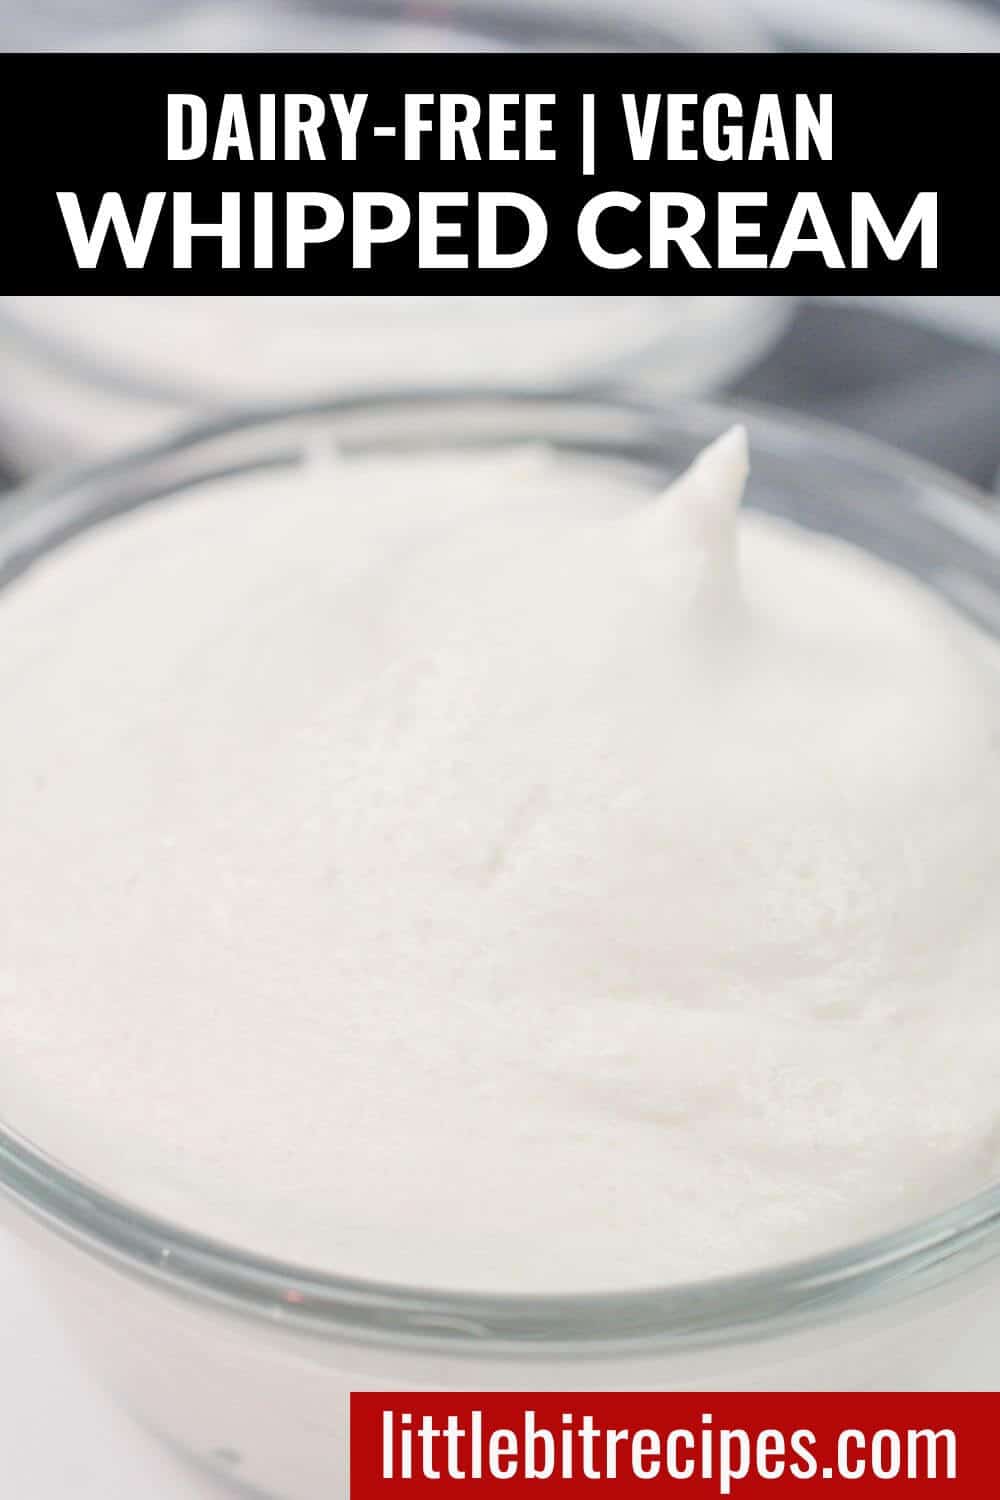 Vegan whipped cream with text.